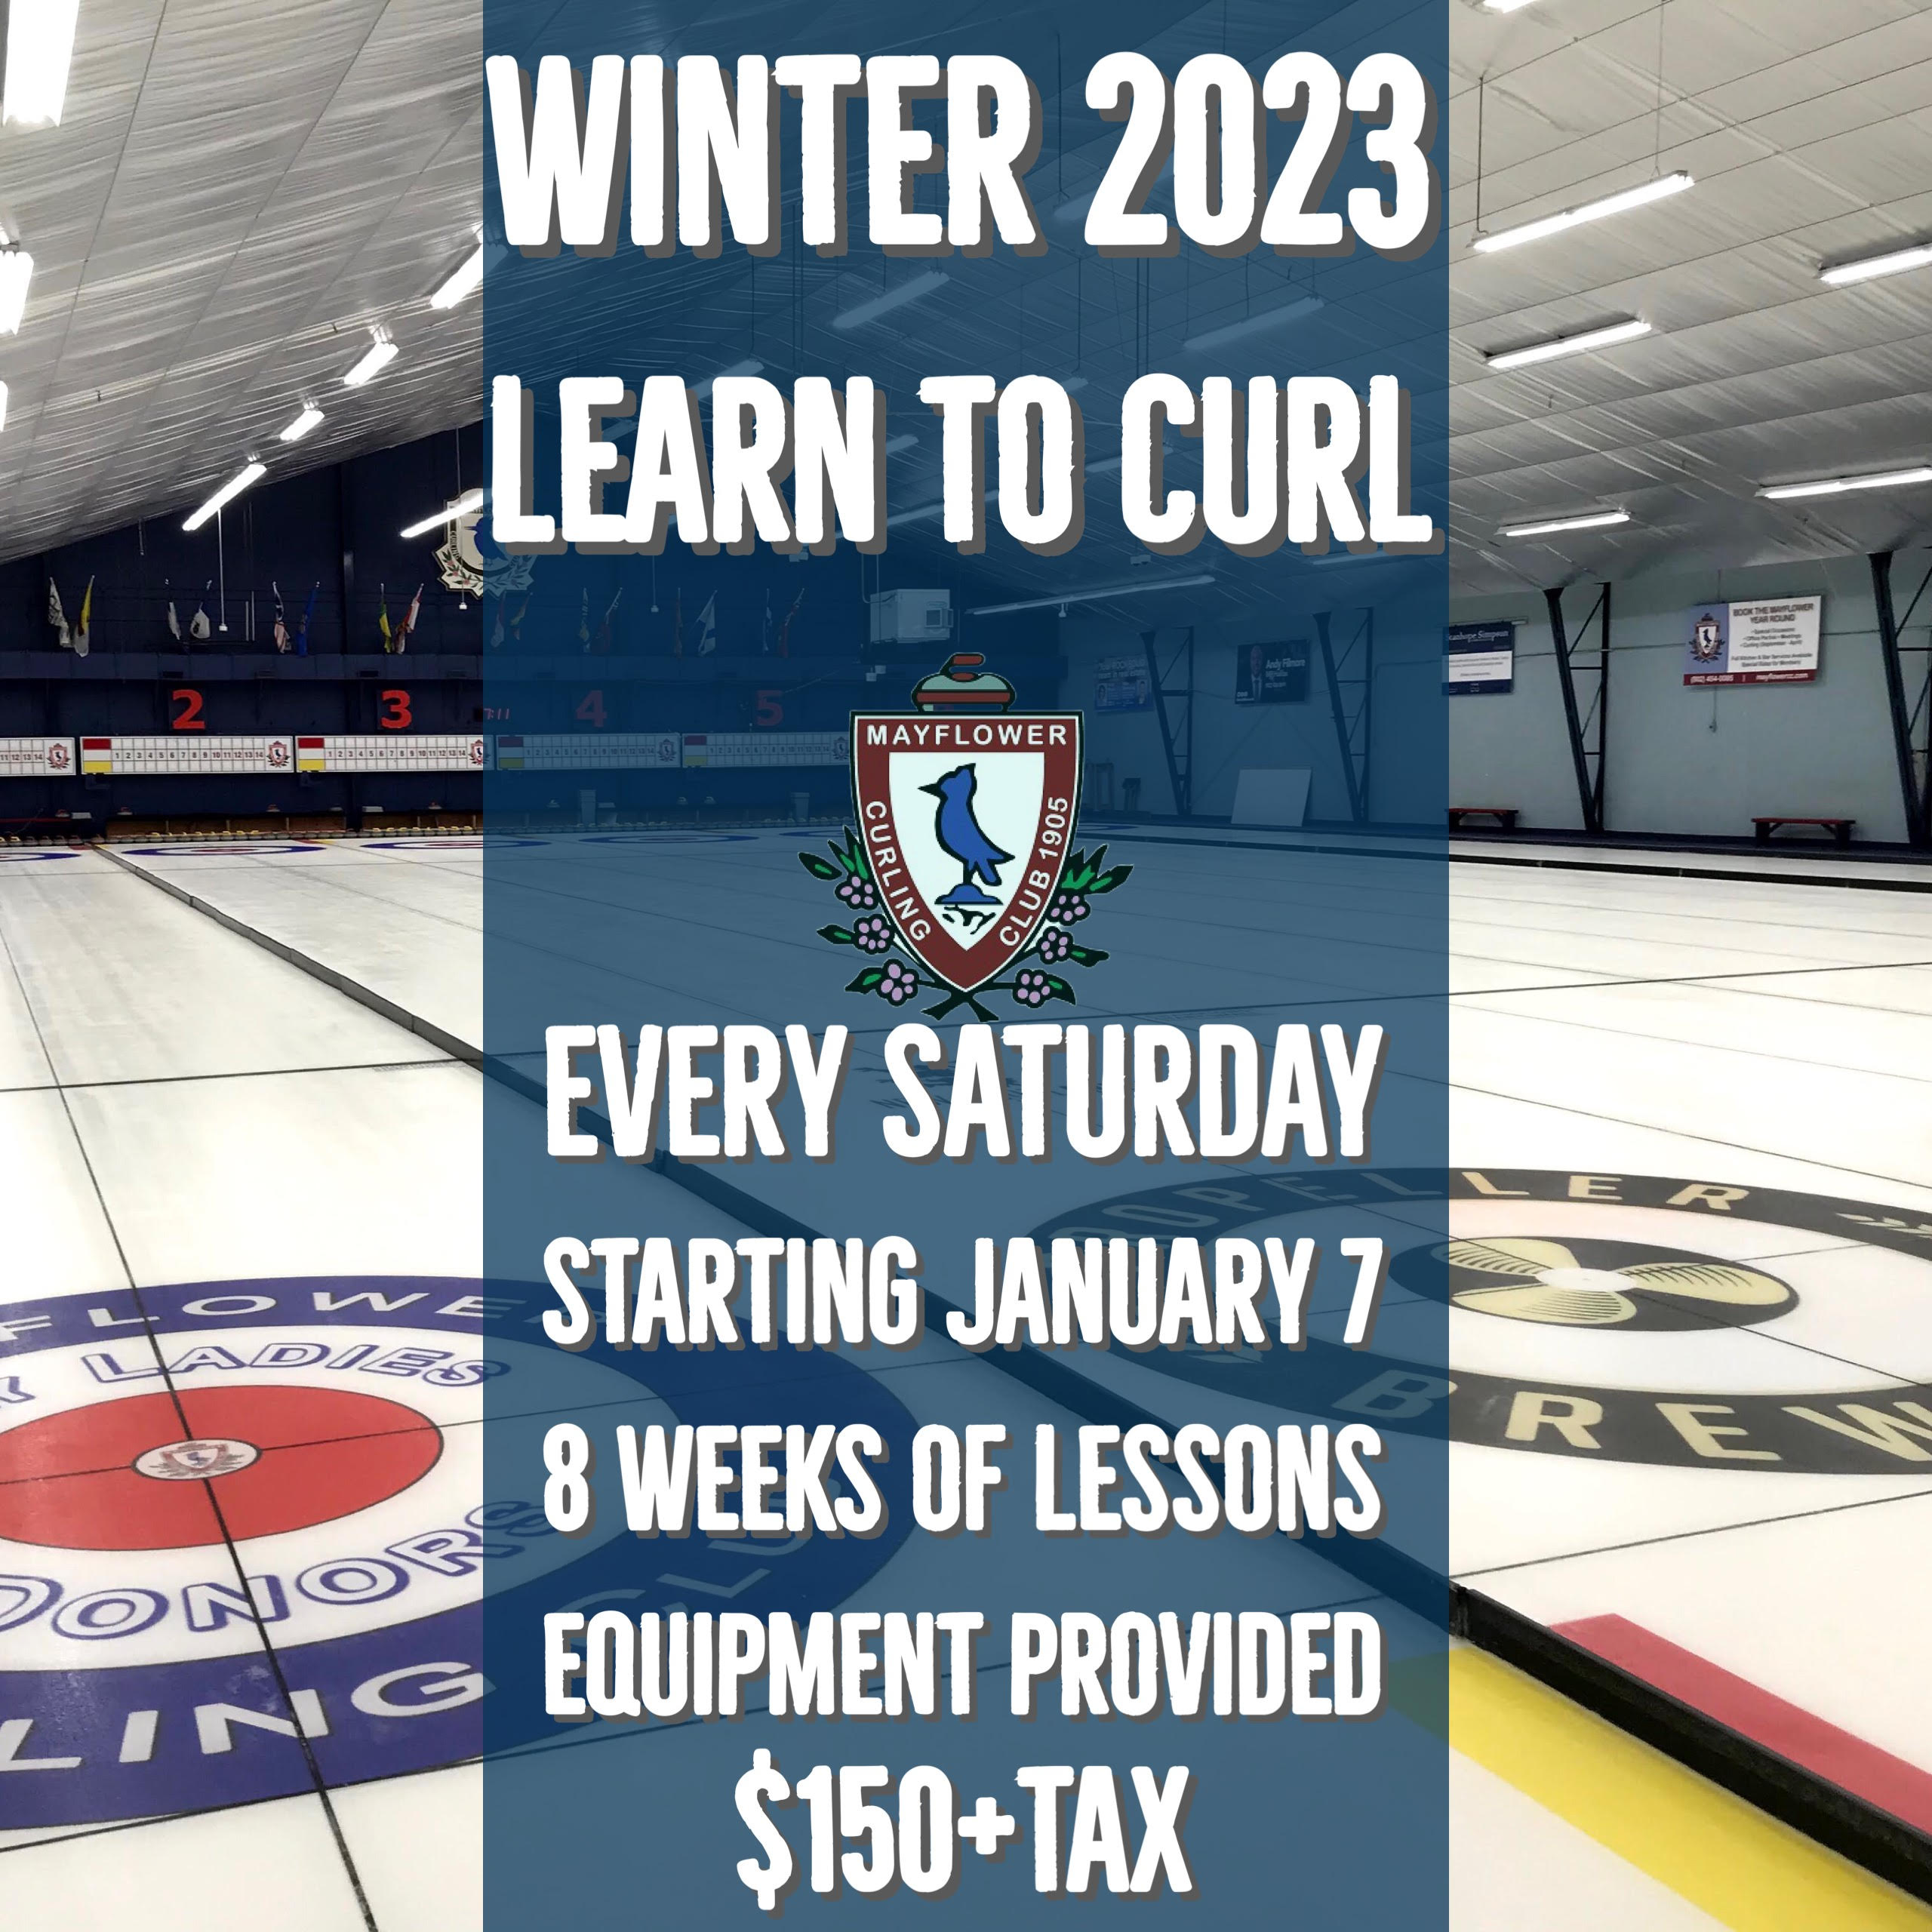 Registration for Winter Learn to Curl 2023